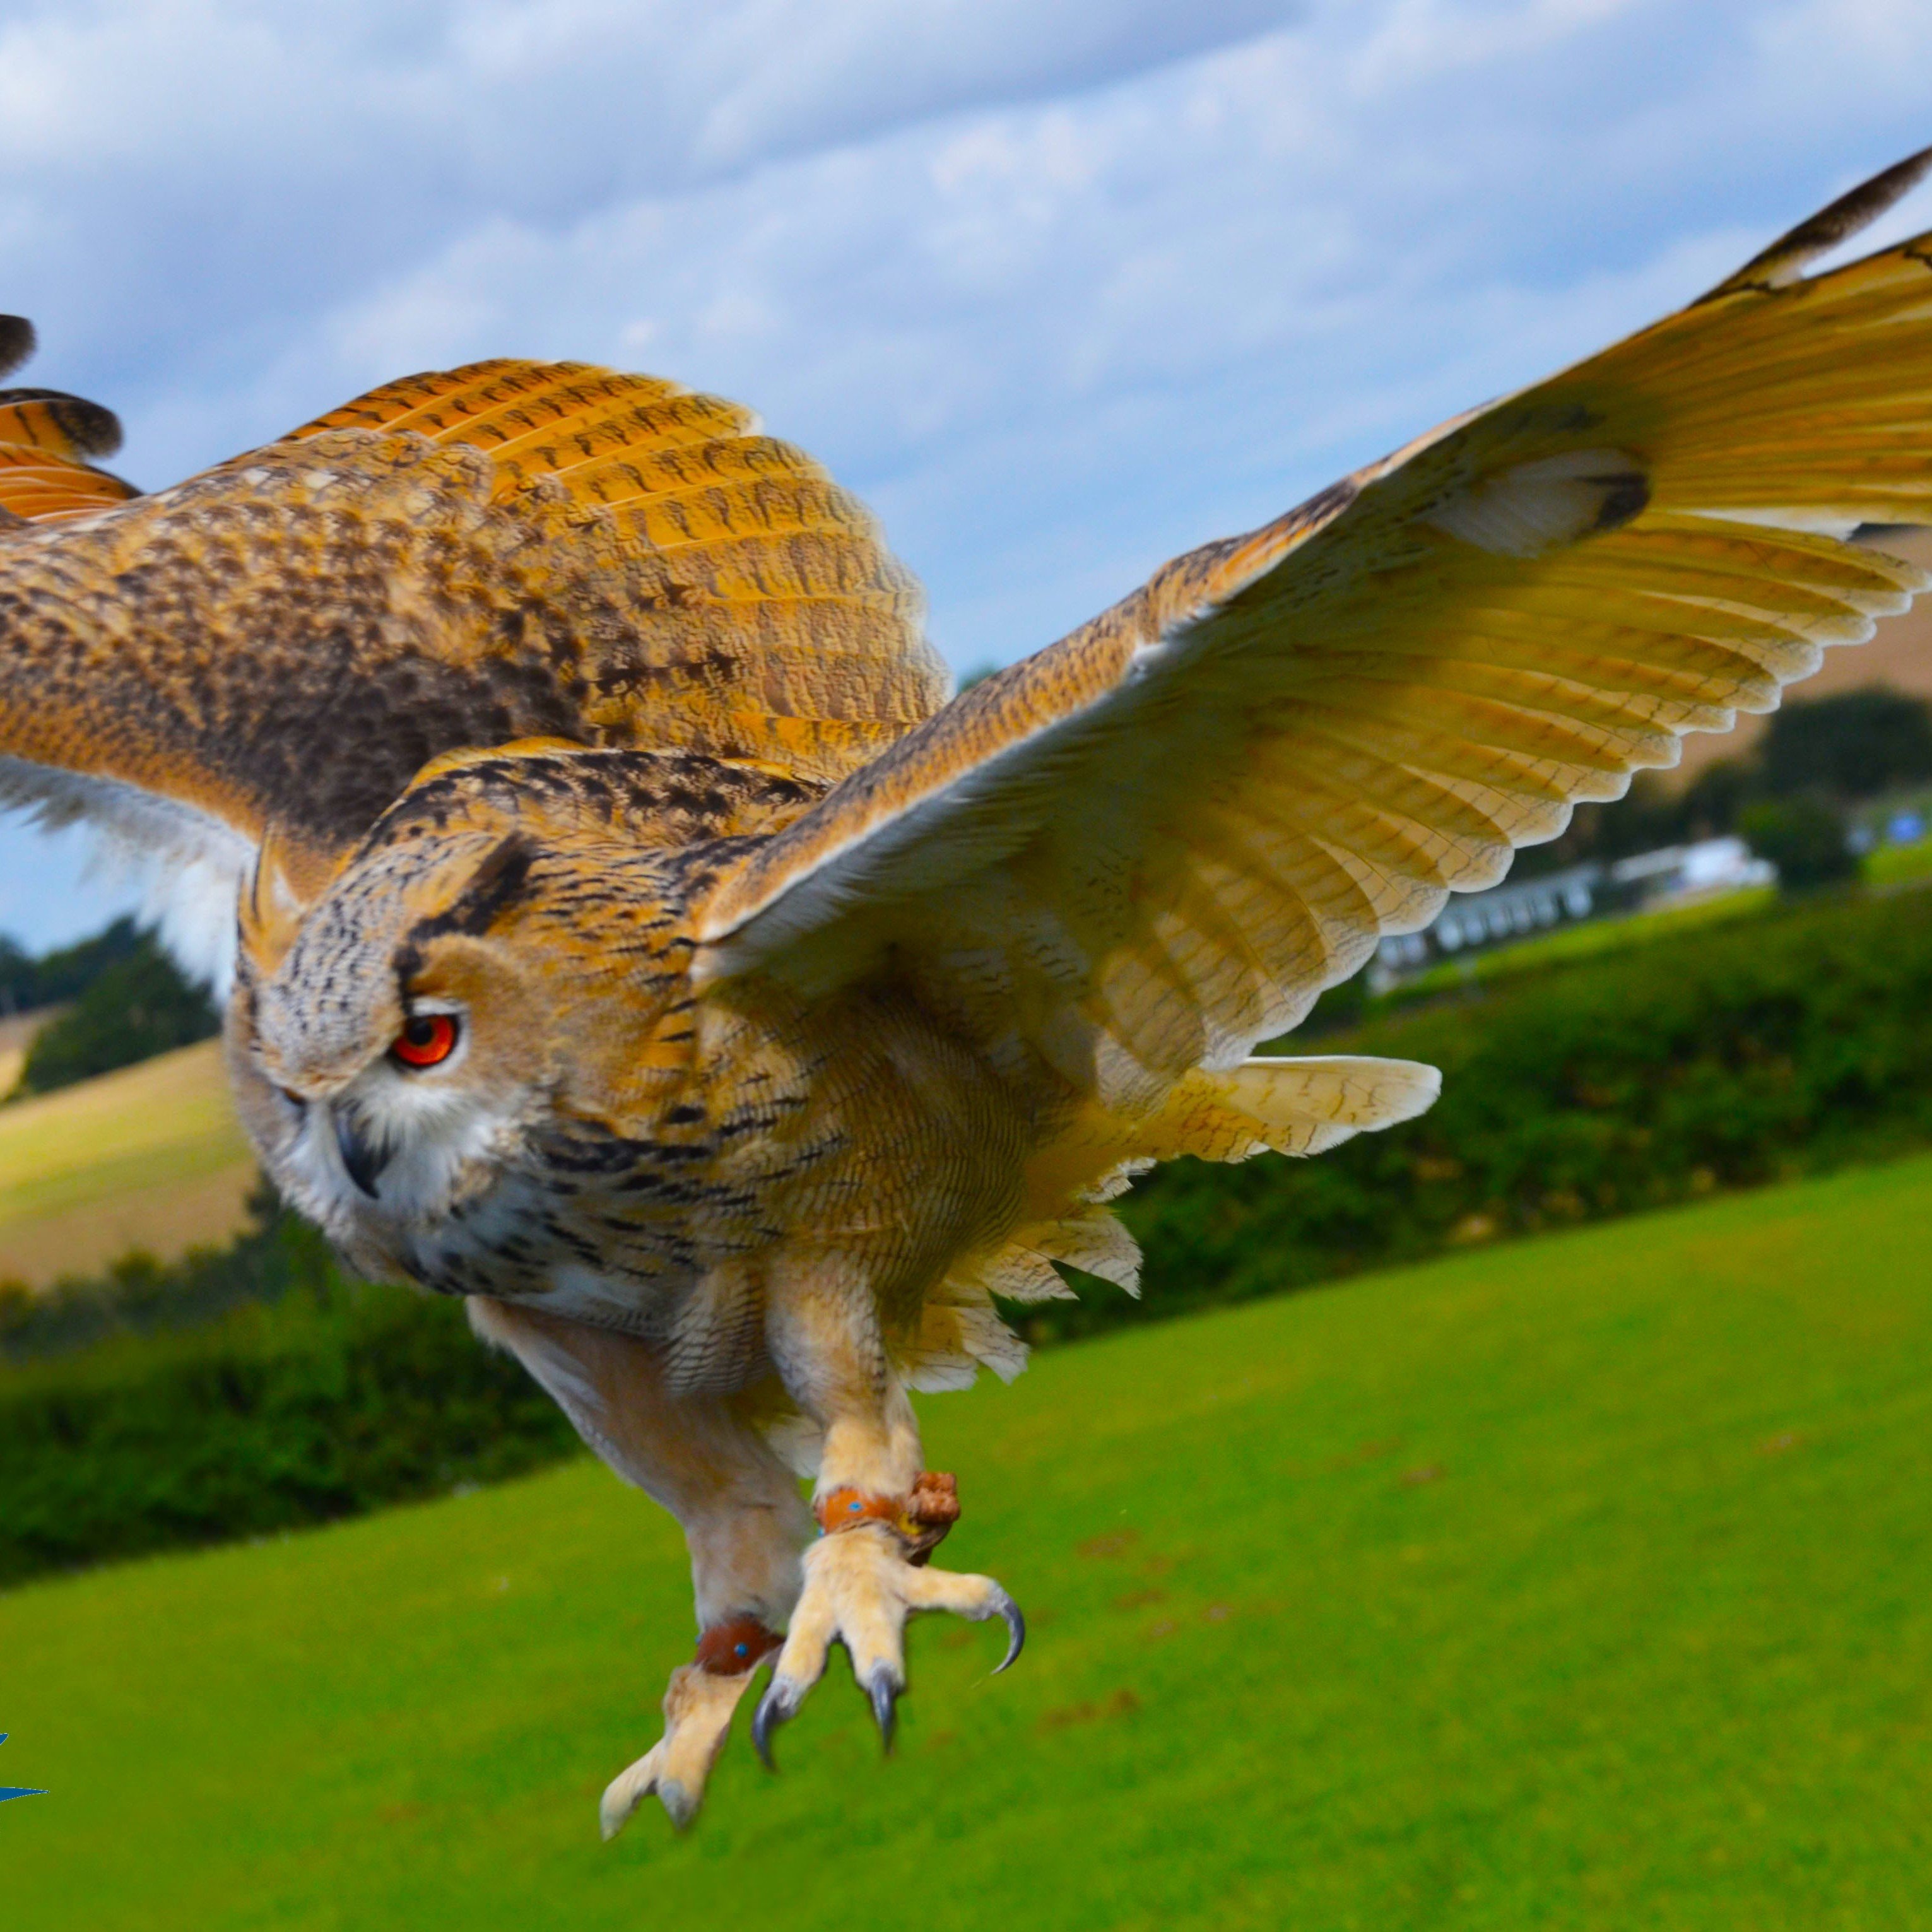 Buyagift Two Hour Birds Of Prey Experience For Two At Cj's Birds Of Prey